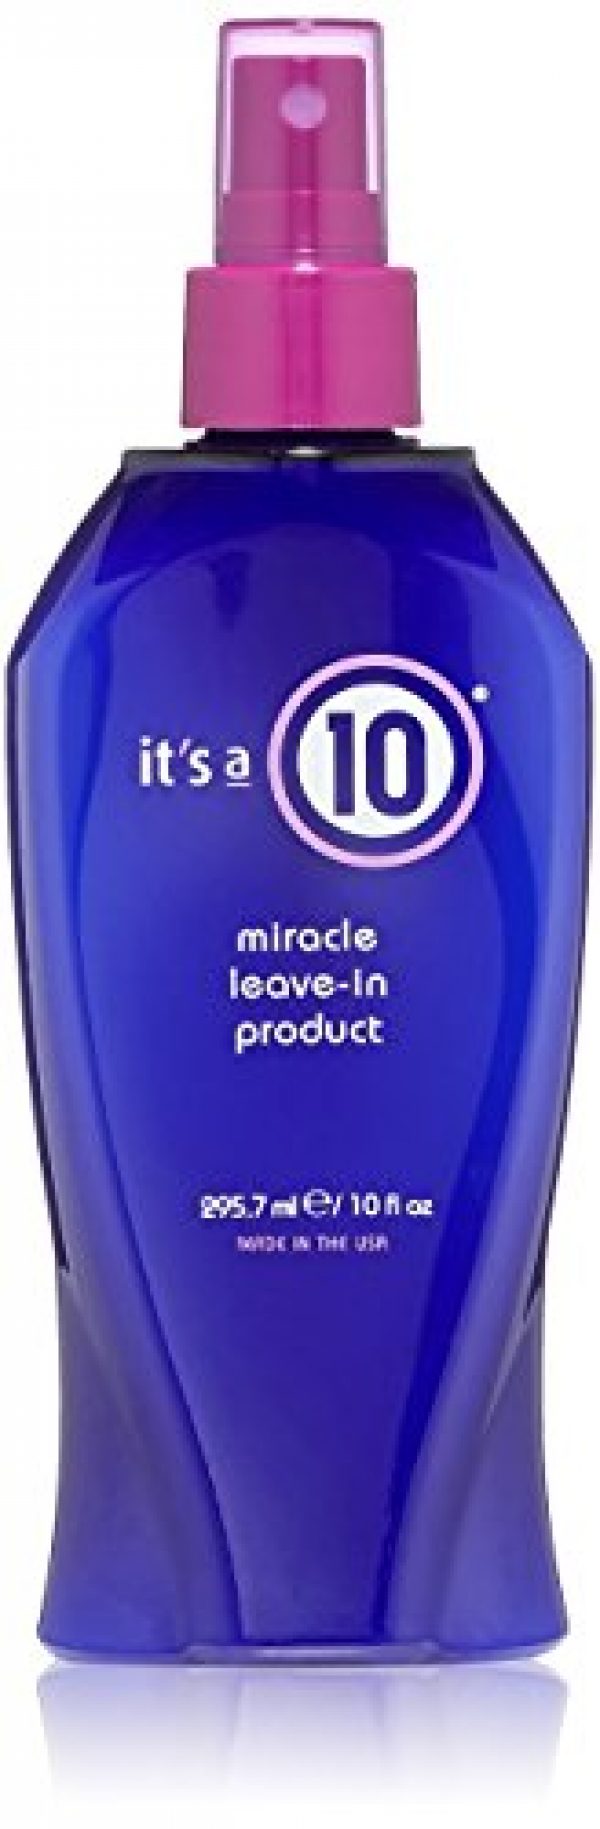 It's A 10 Haircare Miracle Leave-In Conditioner Spray - 10 oz. - 1ct 17